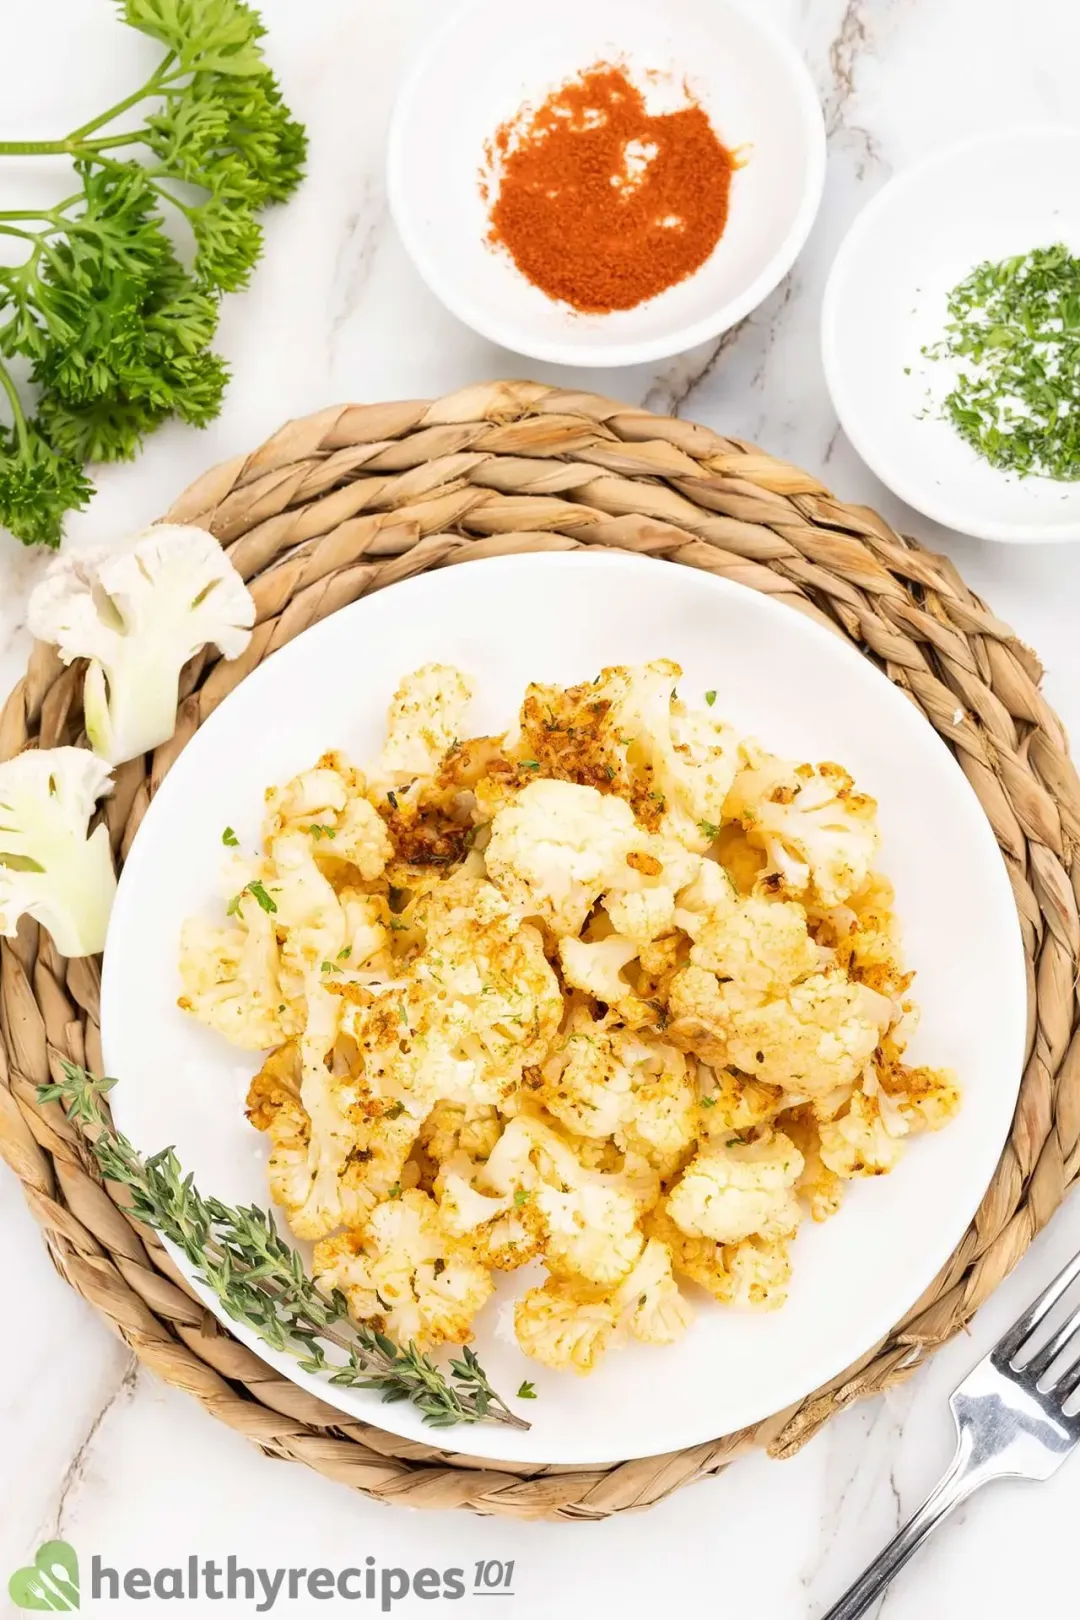 What to Eat With Roasted Cauliflower